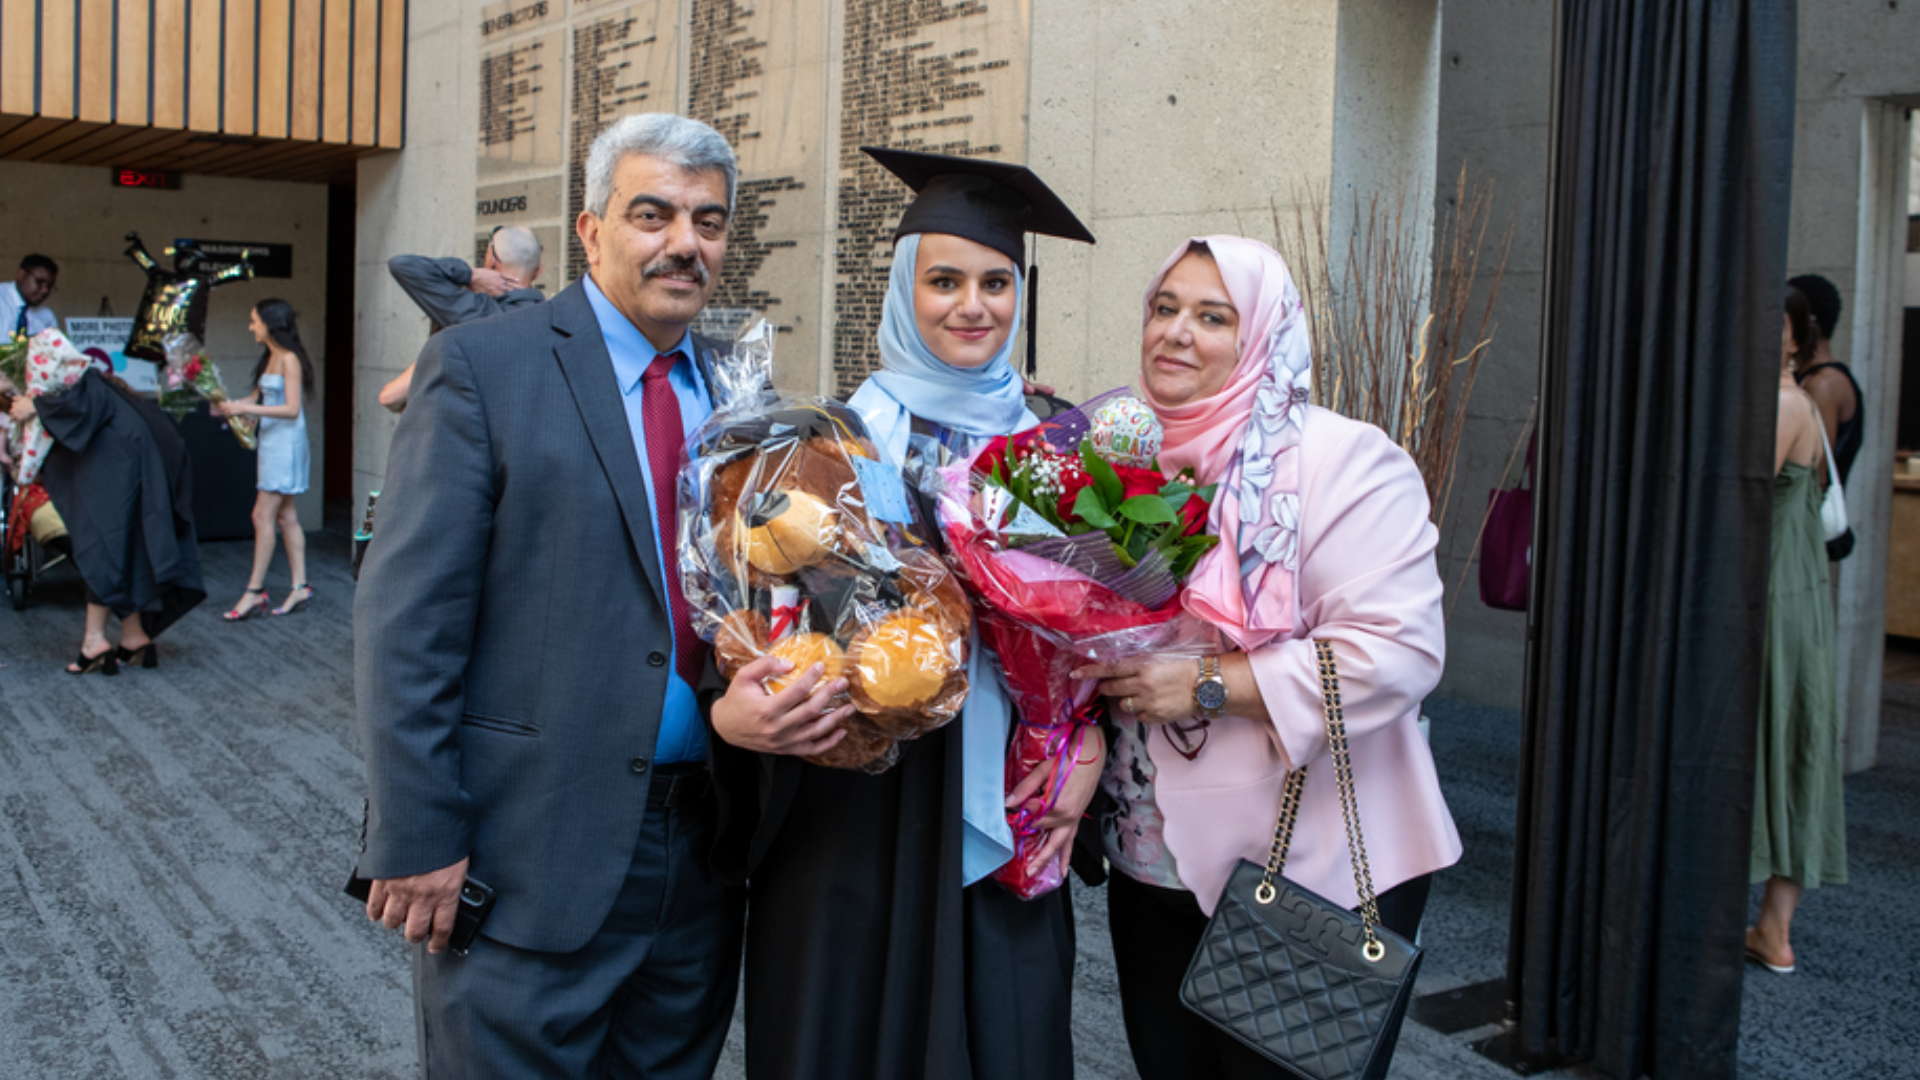 Master of Public Policy in Digital Society graduate Sara Daas poses for a photo with her parents